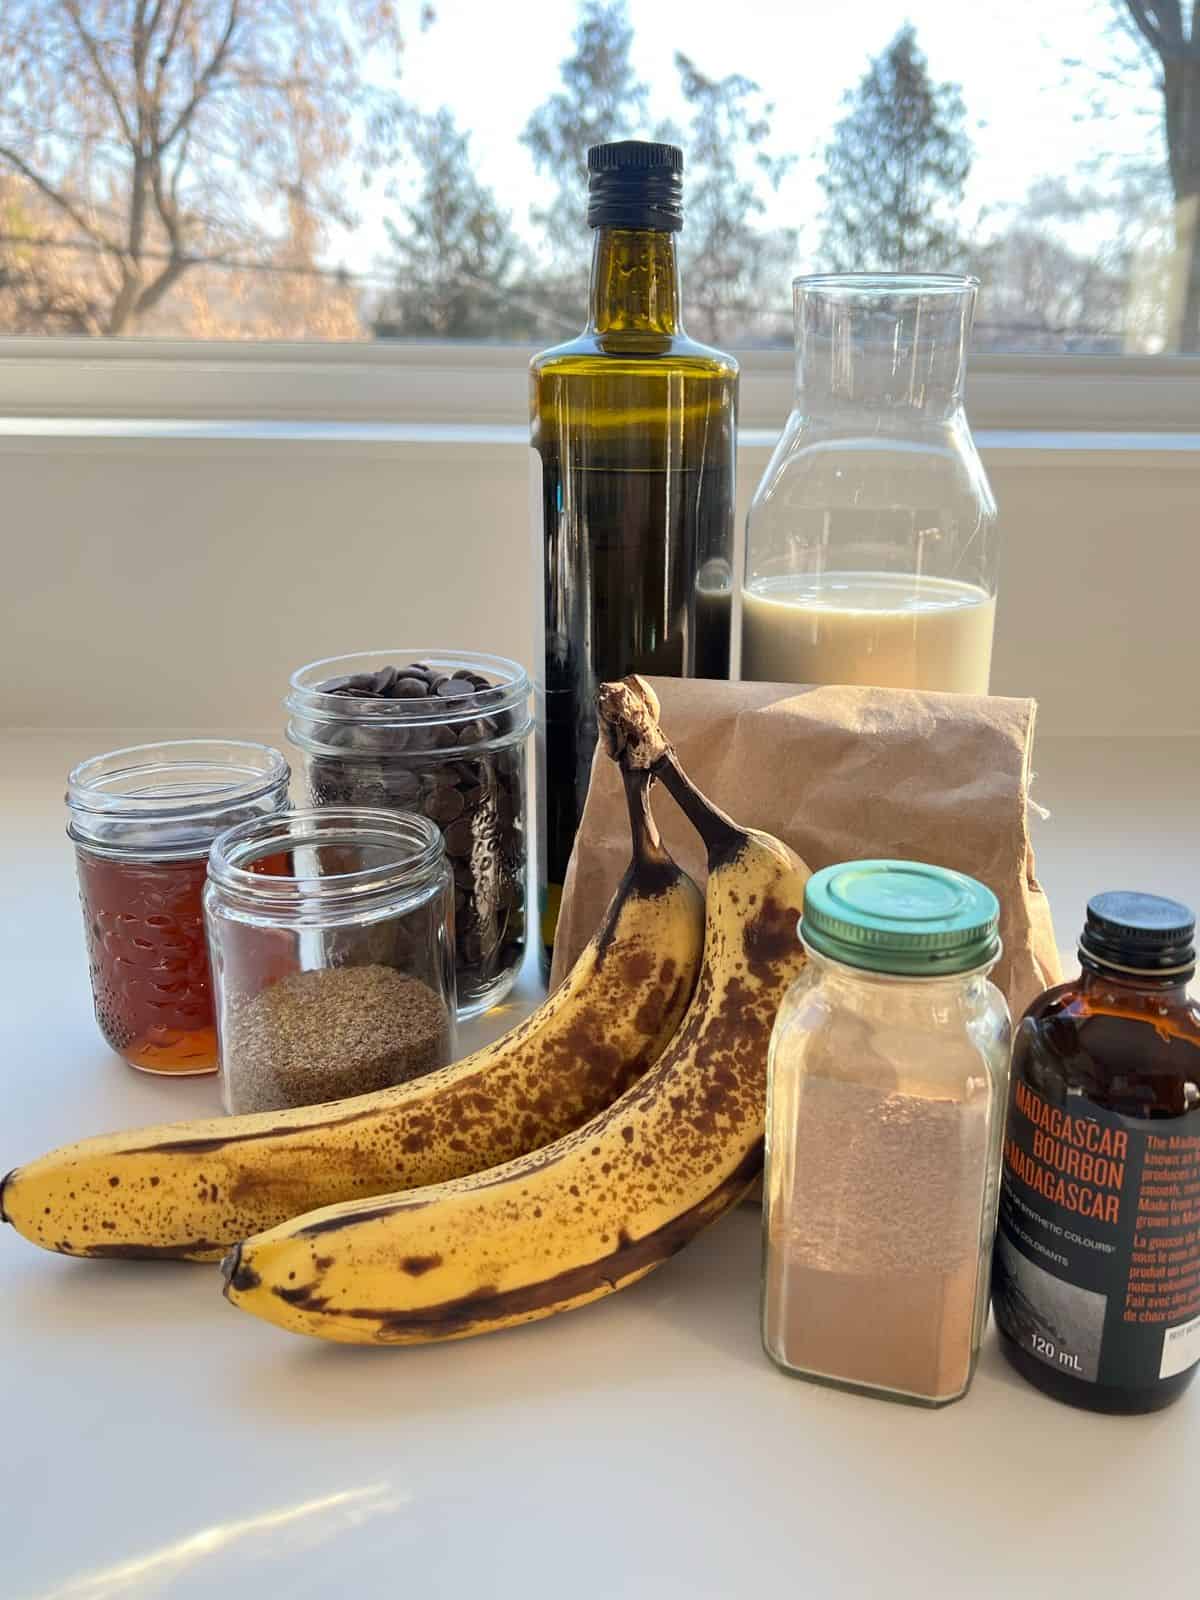 An image of all of the ingredients needed to make Super Chocolatey Banana Bread sitting on a white counter.